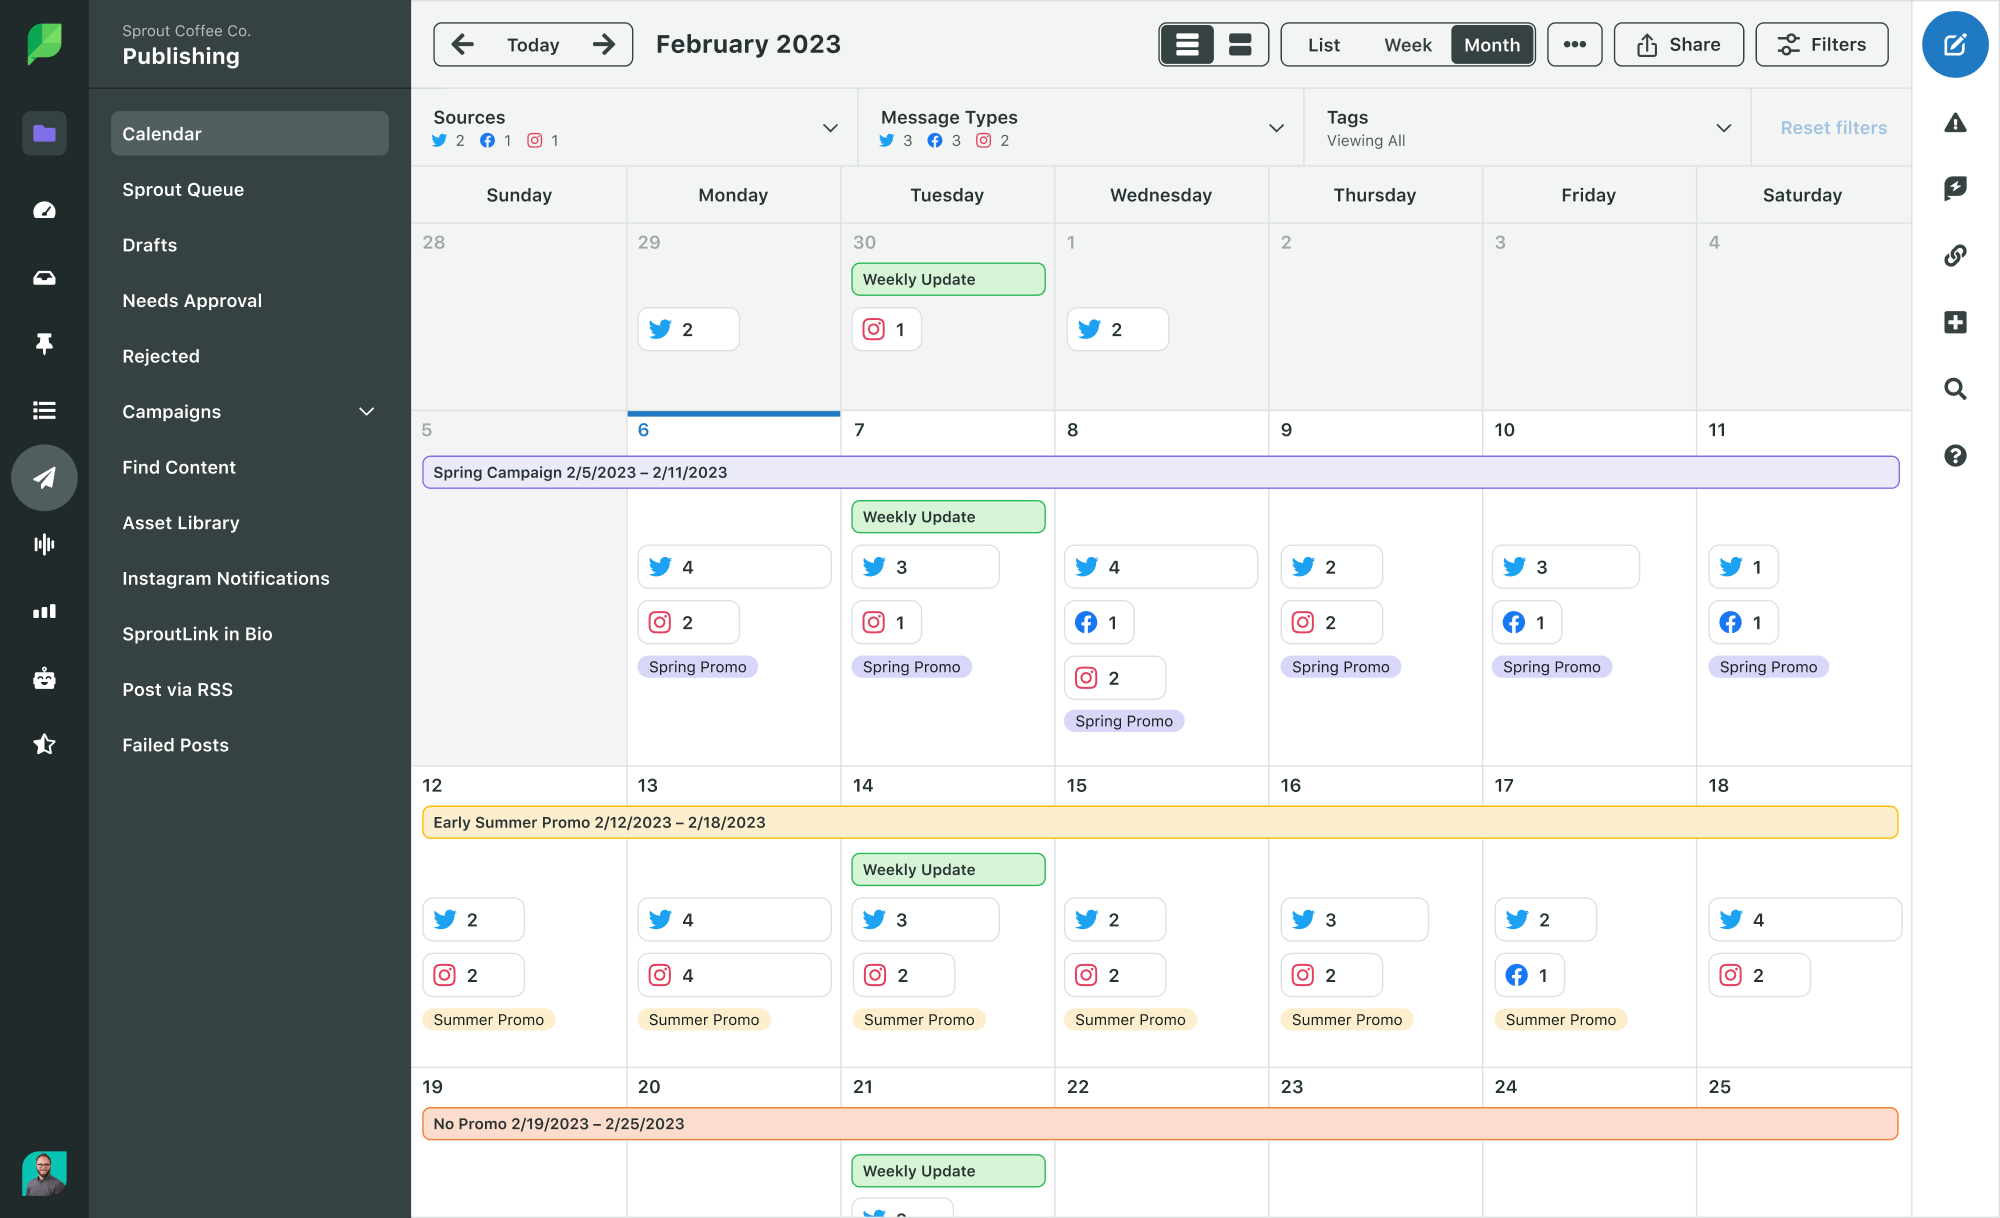 Screenshot of the content calendar in Sprout Social with a weeklong social media campaign with queued posts across multiple platforms during that time.